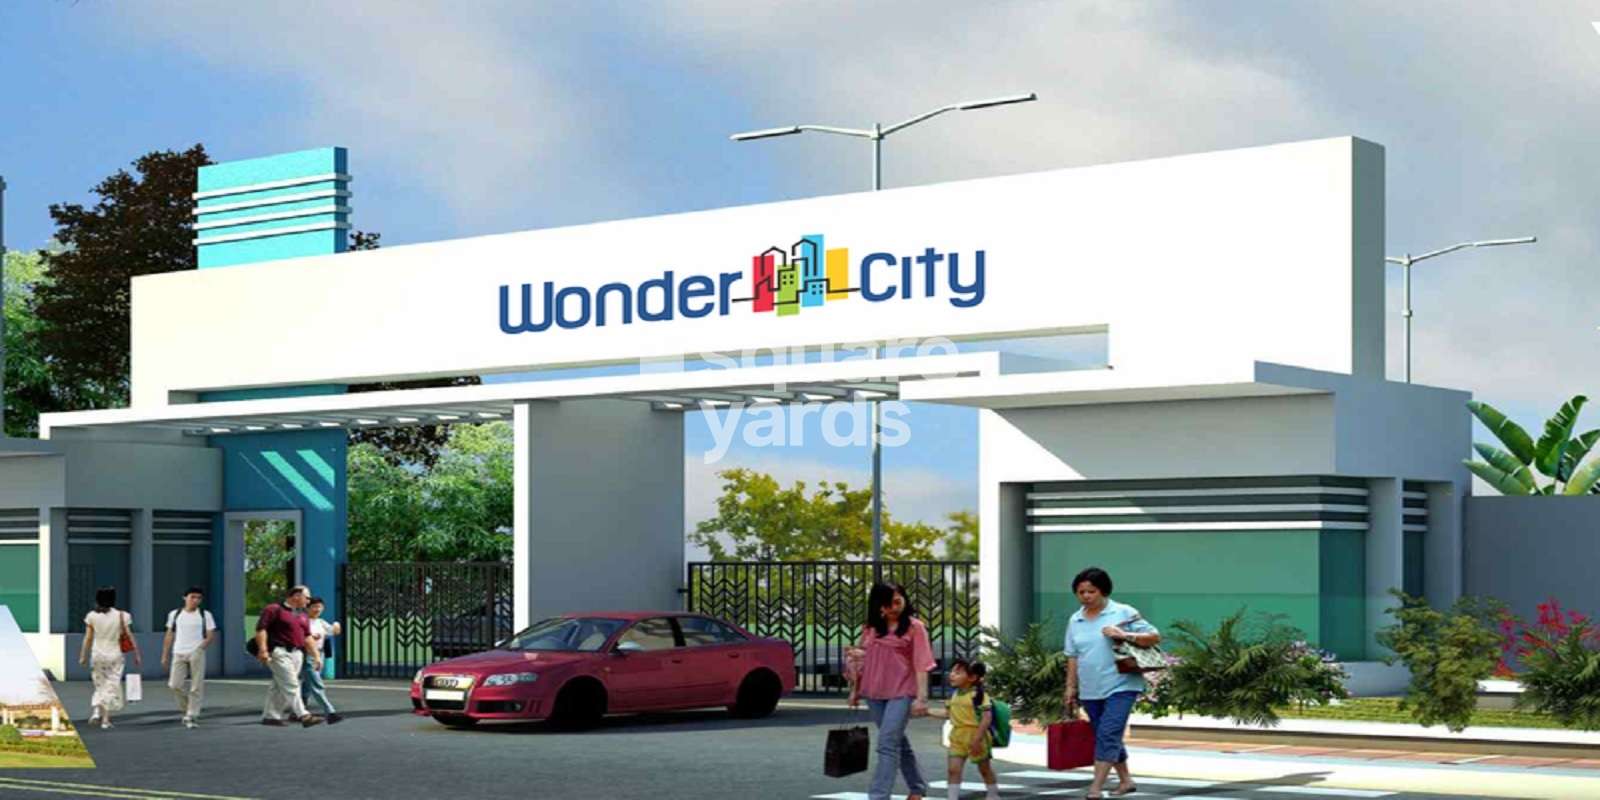 Googee Wonder City Cover Image